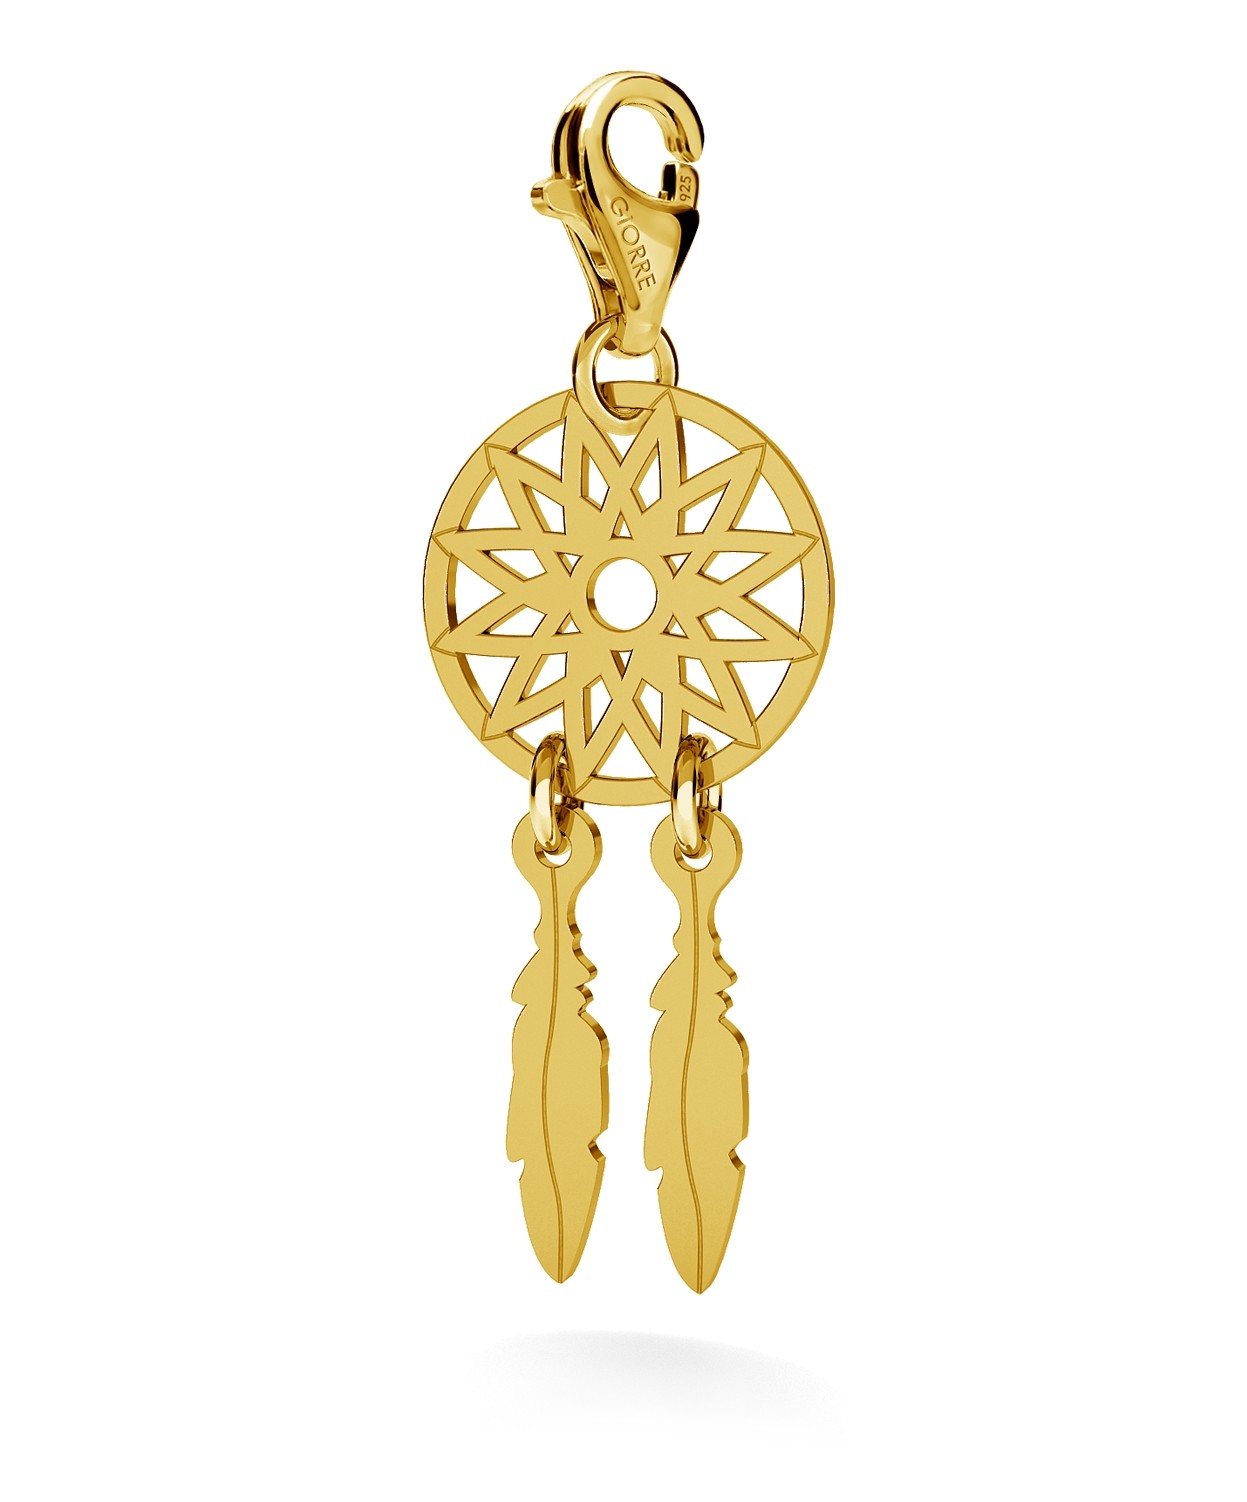 CHARM 110, DREAM CATCHER, STERLING SILVER (925) RHODIUM OR GOLD PLATED